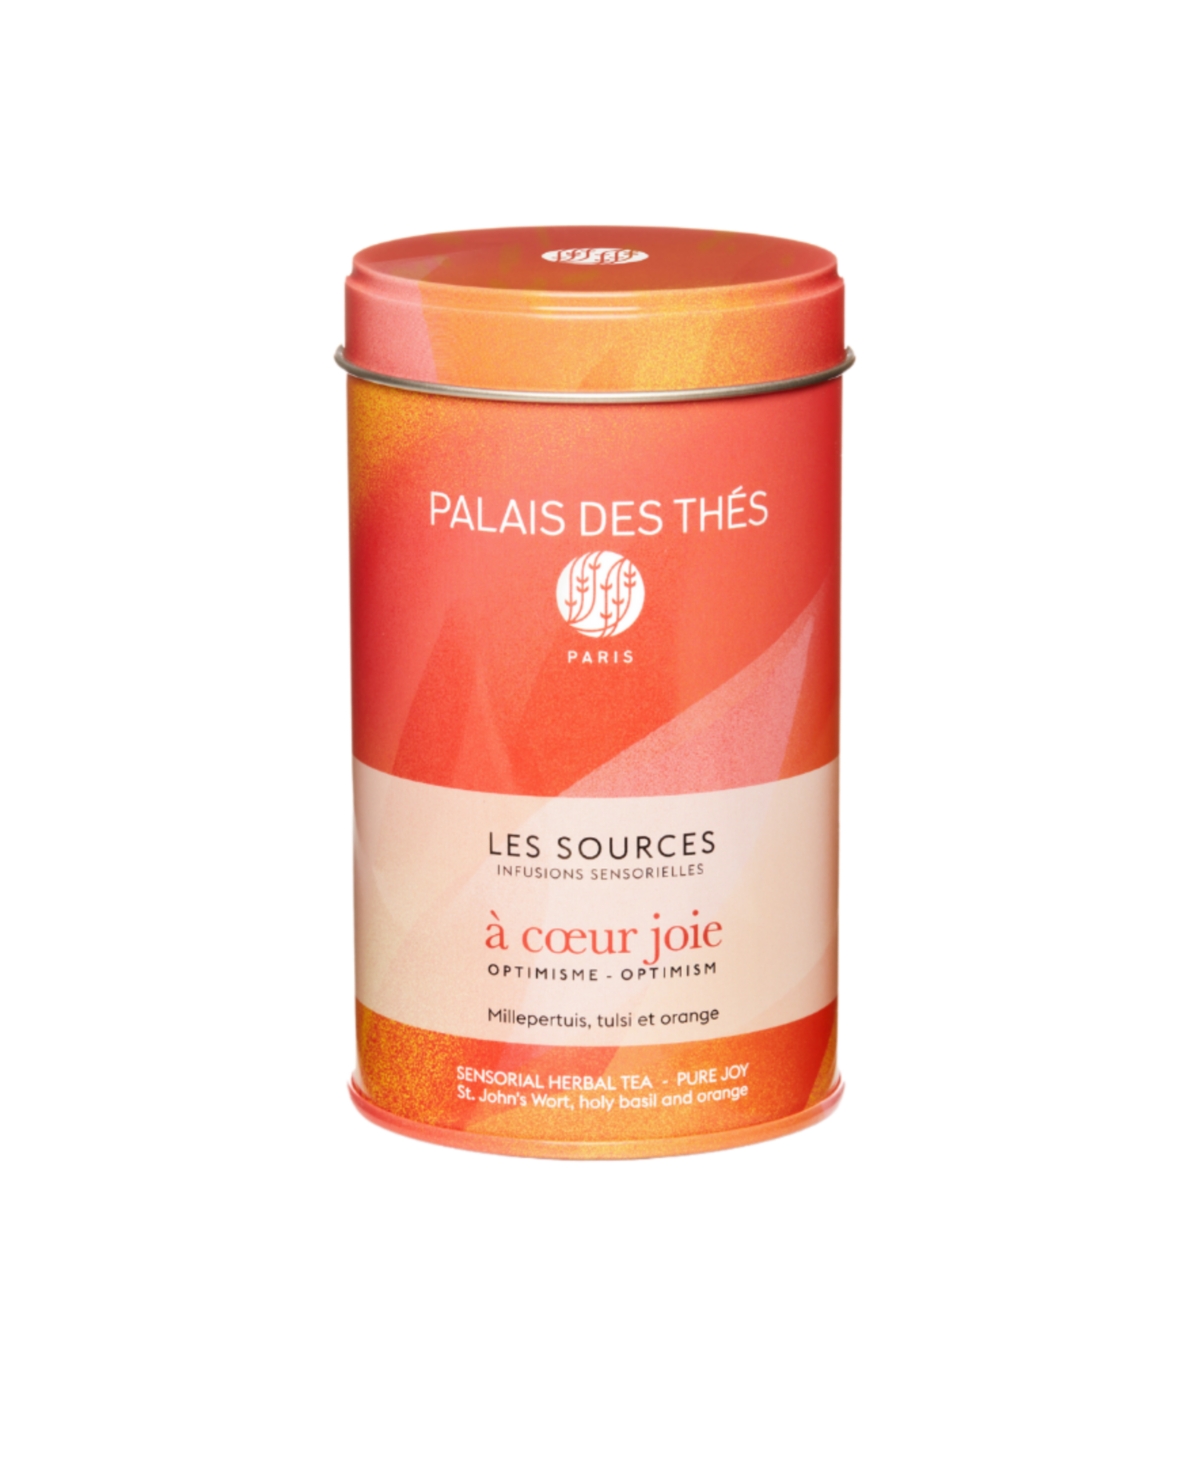 Palais Des Thes St. John's Wort, Holy Basil And Orange Sensorial Herbal Tea Holiday Gift In No Color